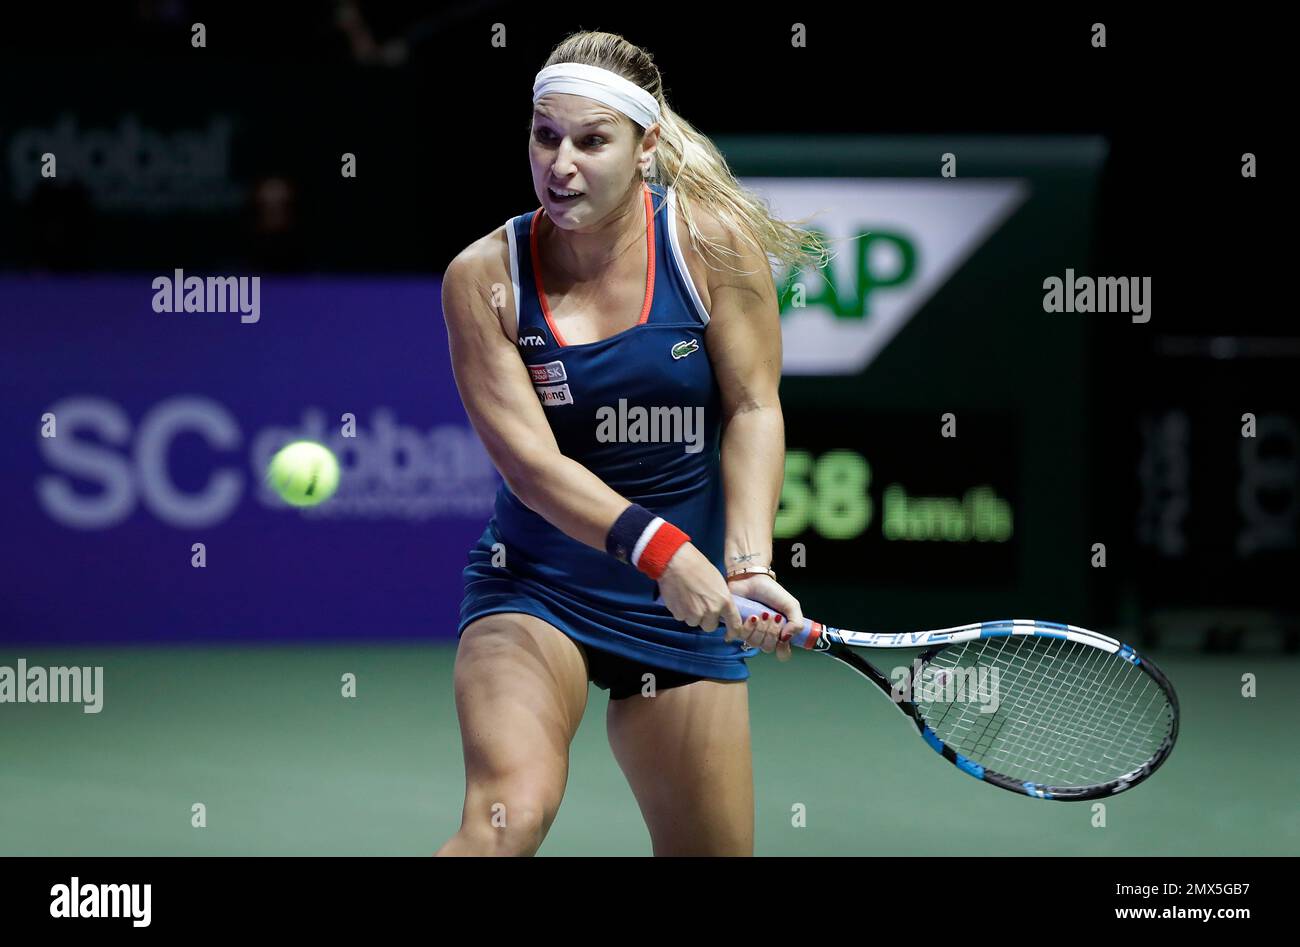 Dominika Cibulkova of Slovakia makes a backhand return to Angelique Kerber  of Germany during their women's final match at the WTA tennis tournament in  Singapore, Sunday, Oct. 30, 2016. (AP Photo/Wong Maye-E